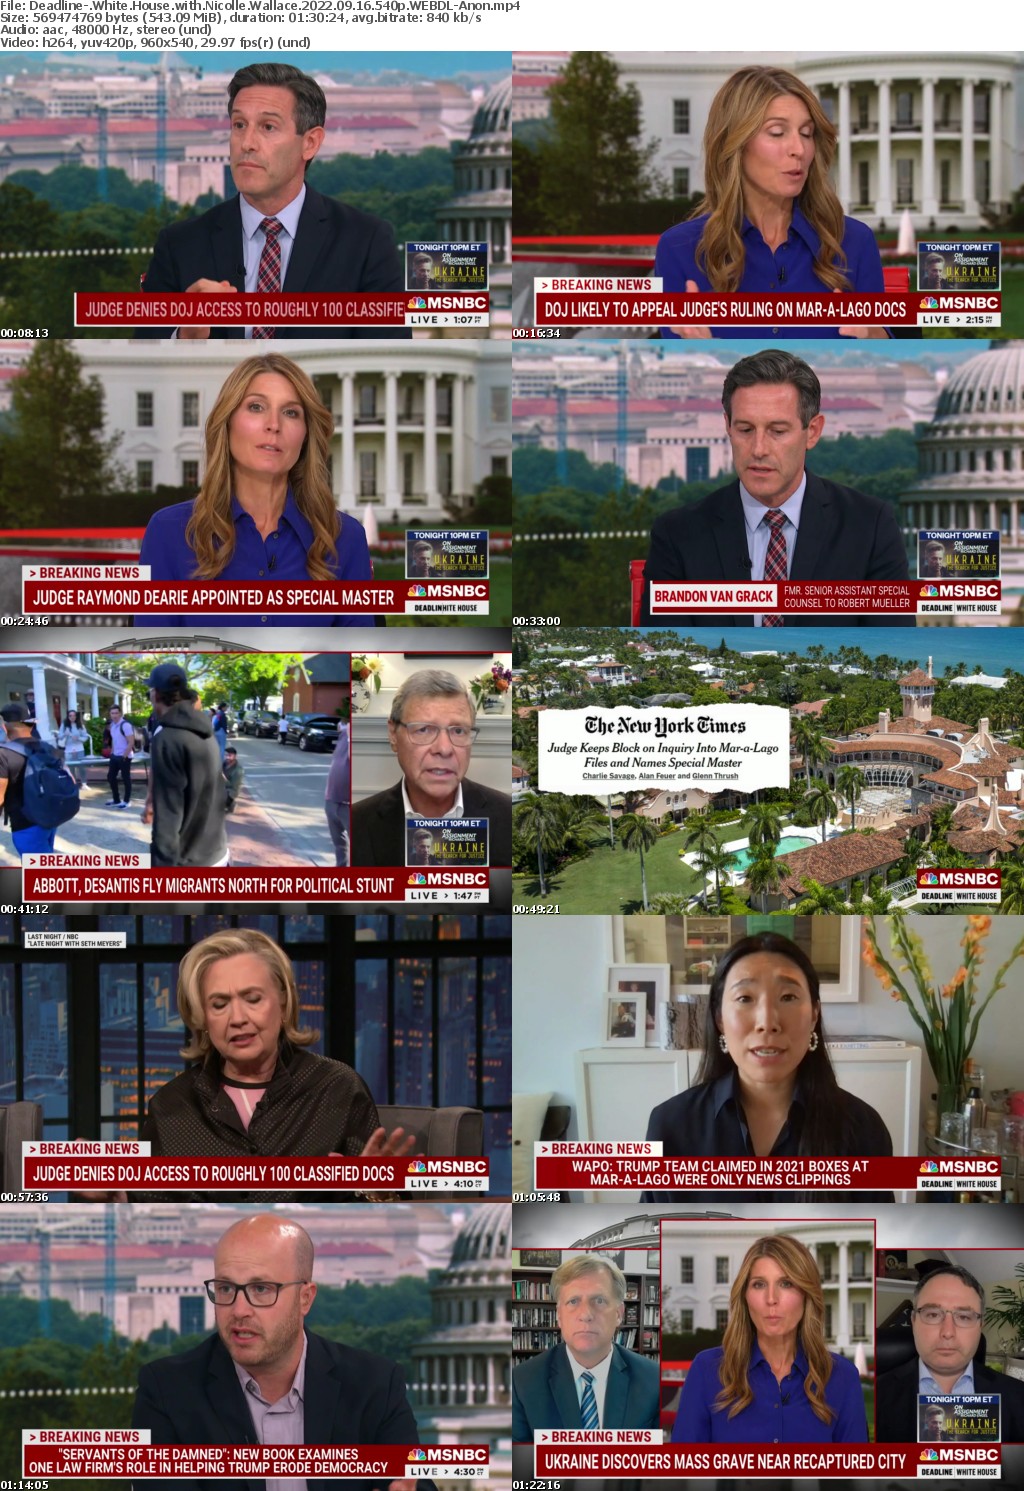 Deadline- White House with Nicolle Wallace 2022 09 16 540p WEBDL-Anon